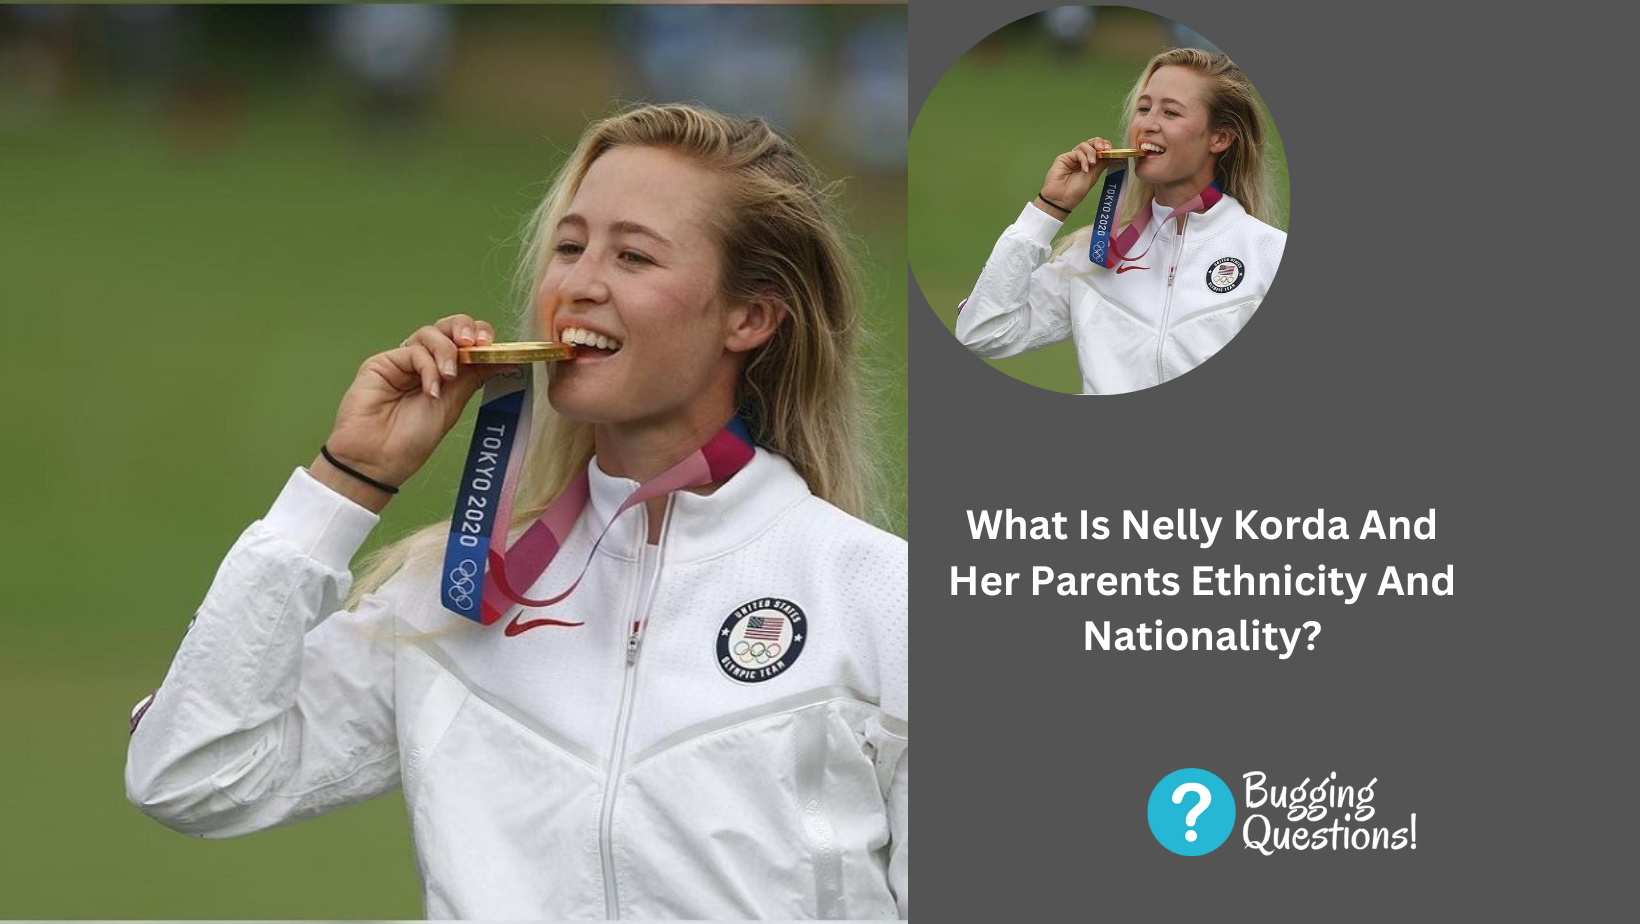 What Is Nelly Korda And Her Parents Ethnicity And Nationality?